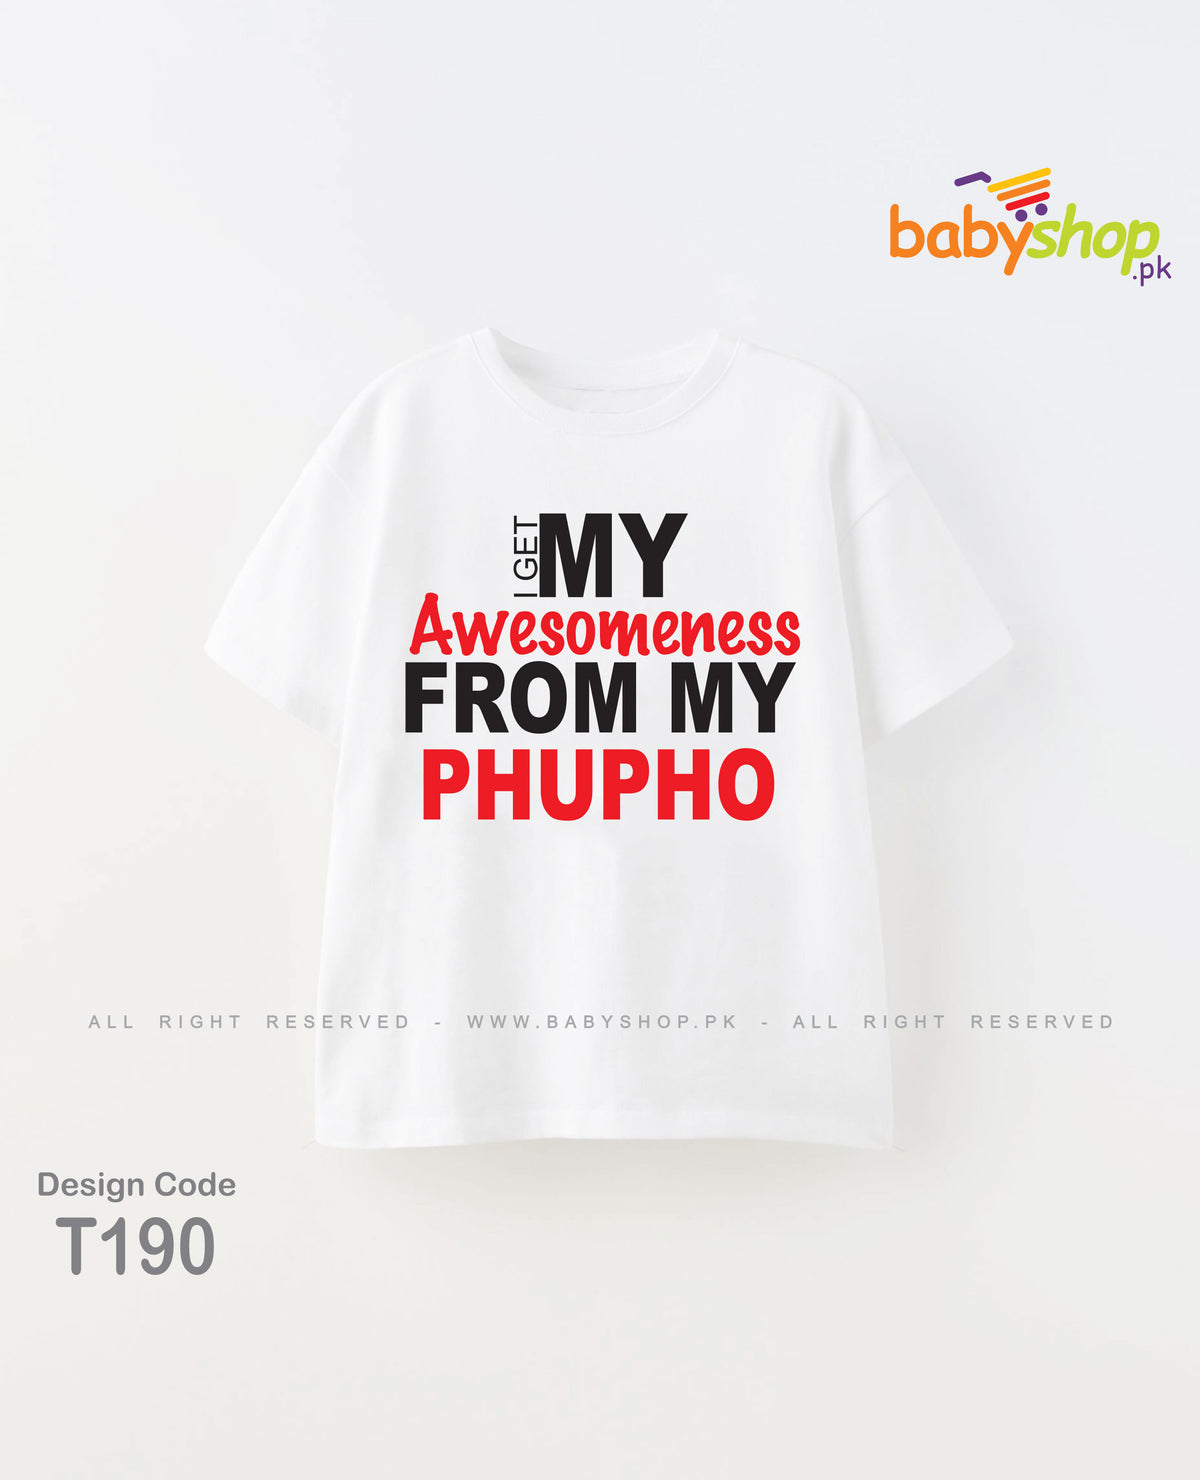 My Awesomeness from my Phupho  baby t shirt